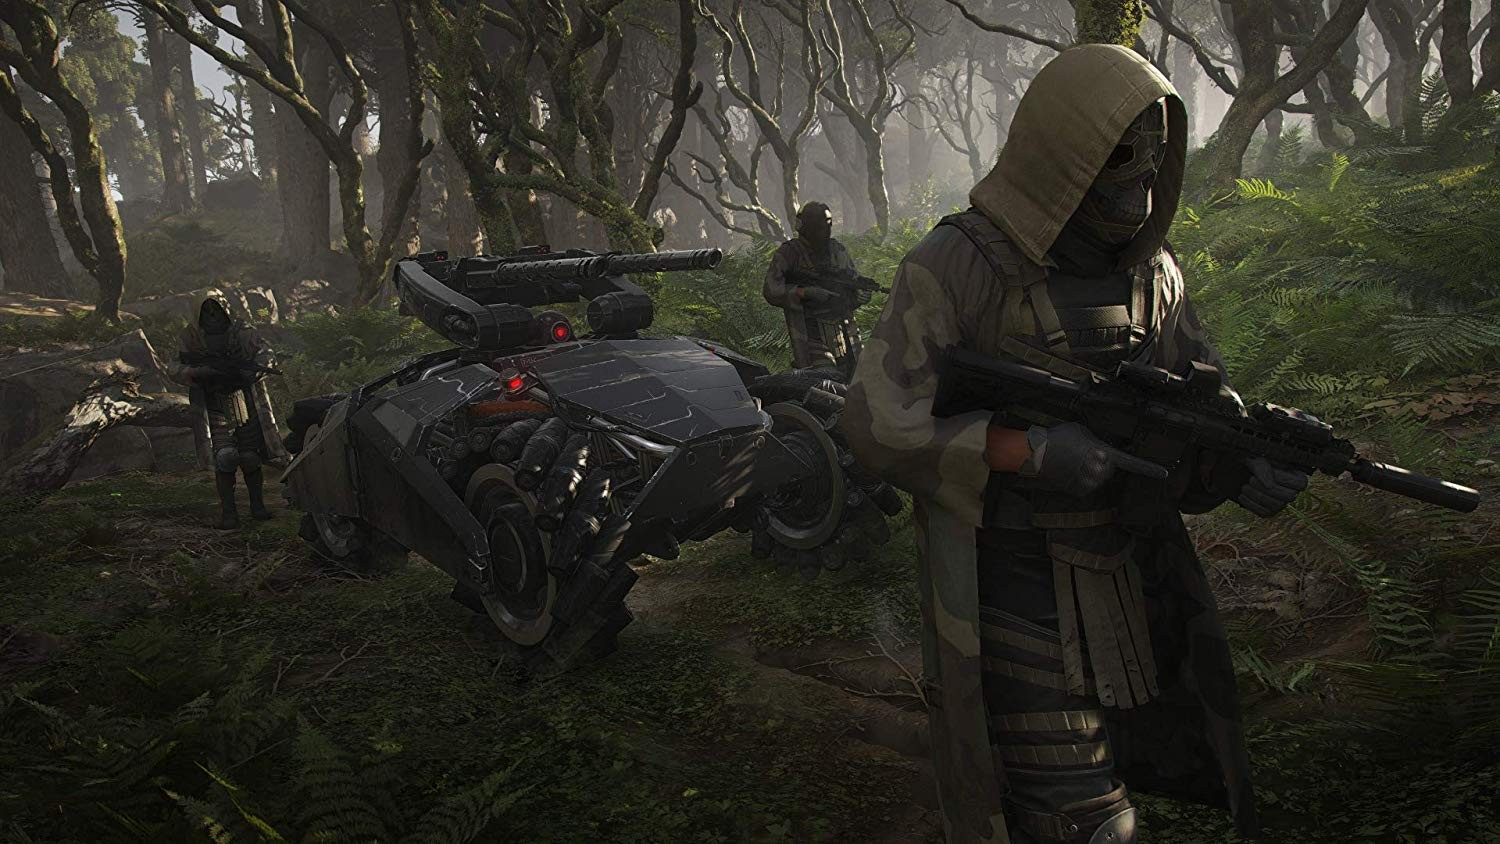 Tom Clancy's Ghost Recon: Breakpoint,Tom Clancy's Ghost Recon, xone, xbox one, ps4, playstation 4, Asia japan, au, australia, release date, gameplay, features, price, pre-order, ubisoft, ubisoft paris,Tom Clancy's Ghost Recon Breakpoint